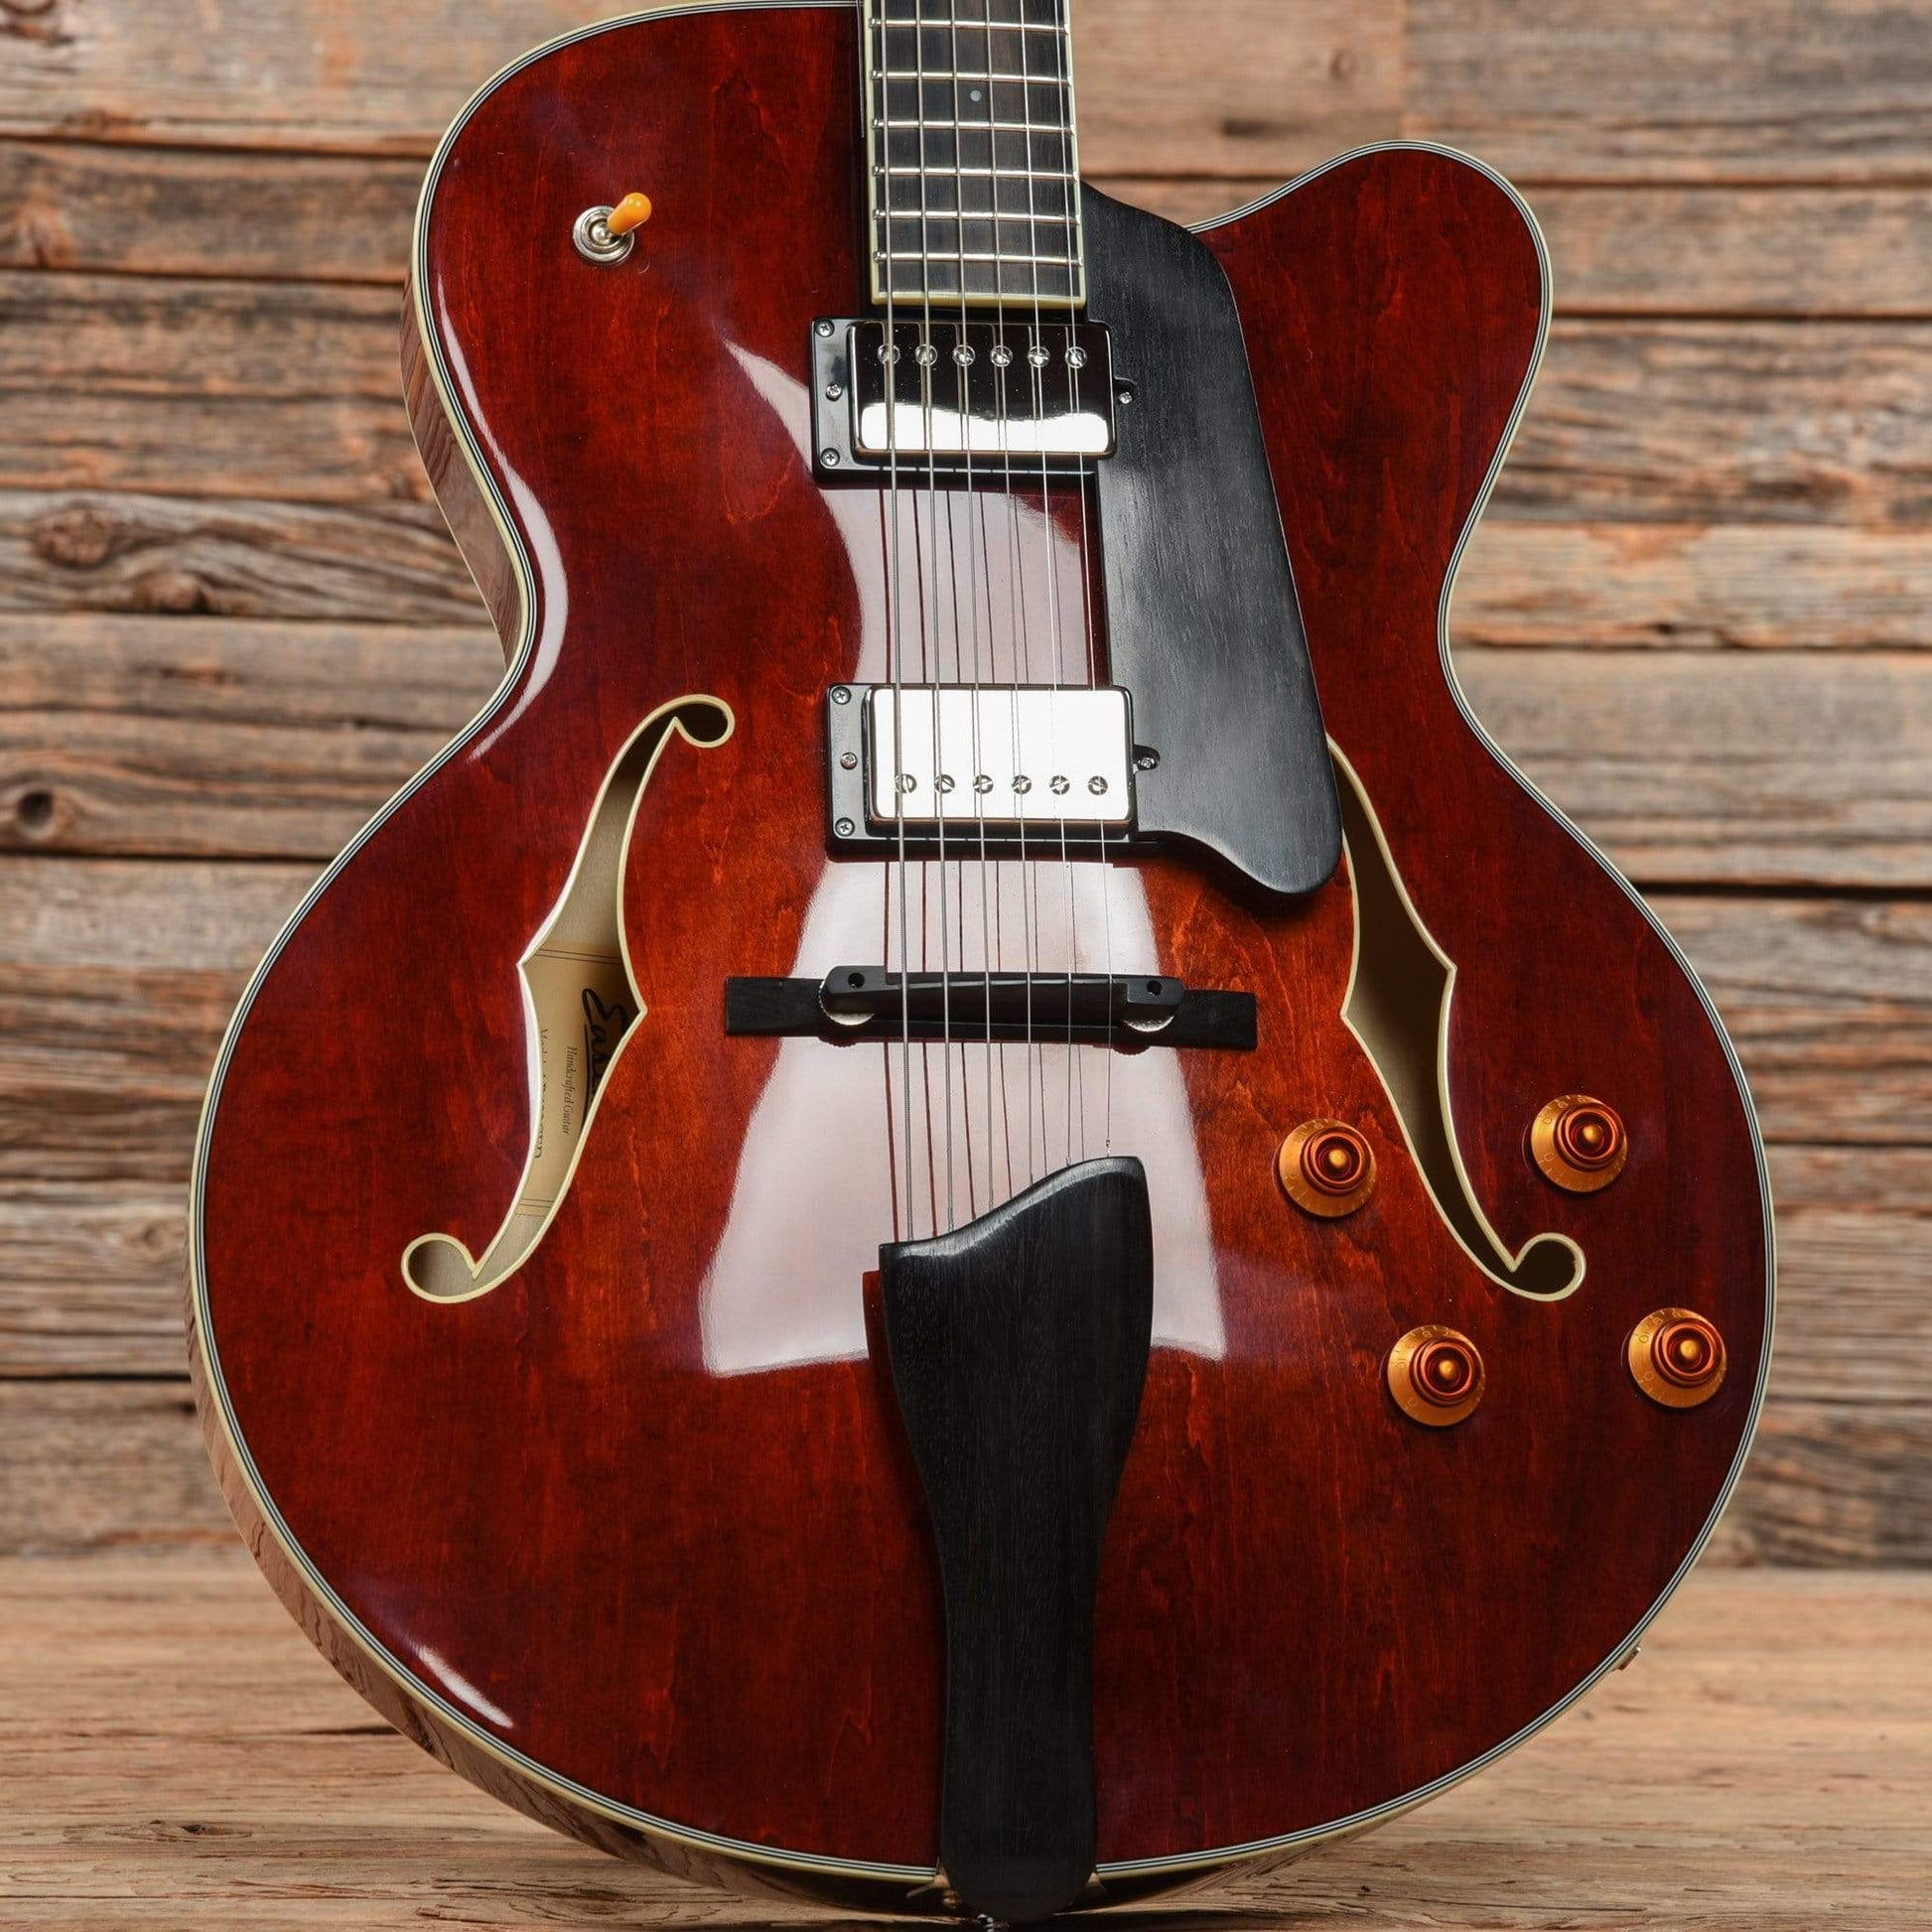 Eastman AR403CE Single Cutaway Hollow-Body Archtop Classic Electric Guitars / Hollow Body